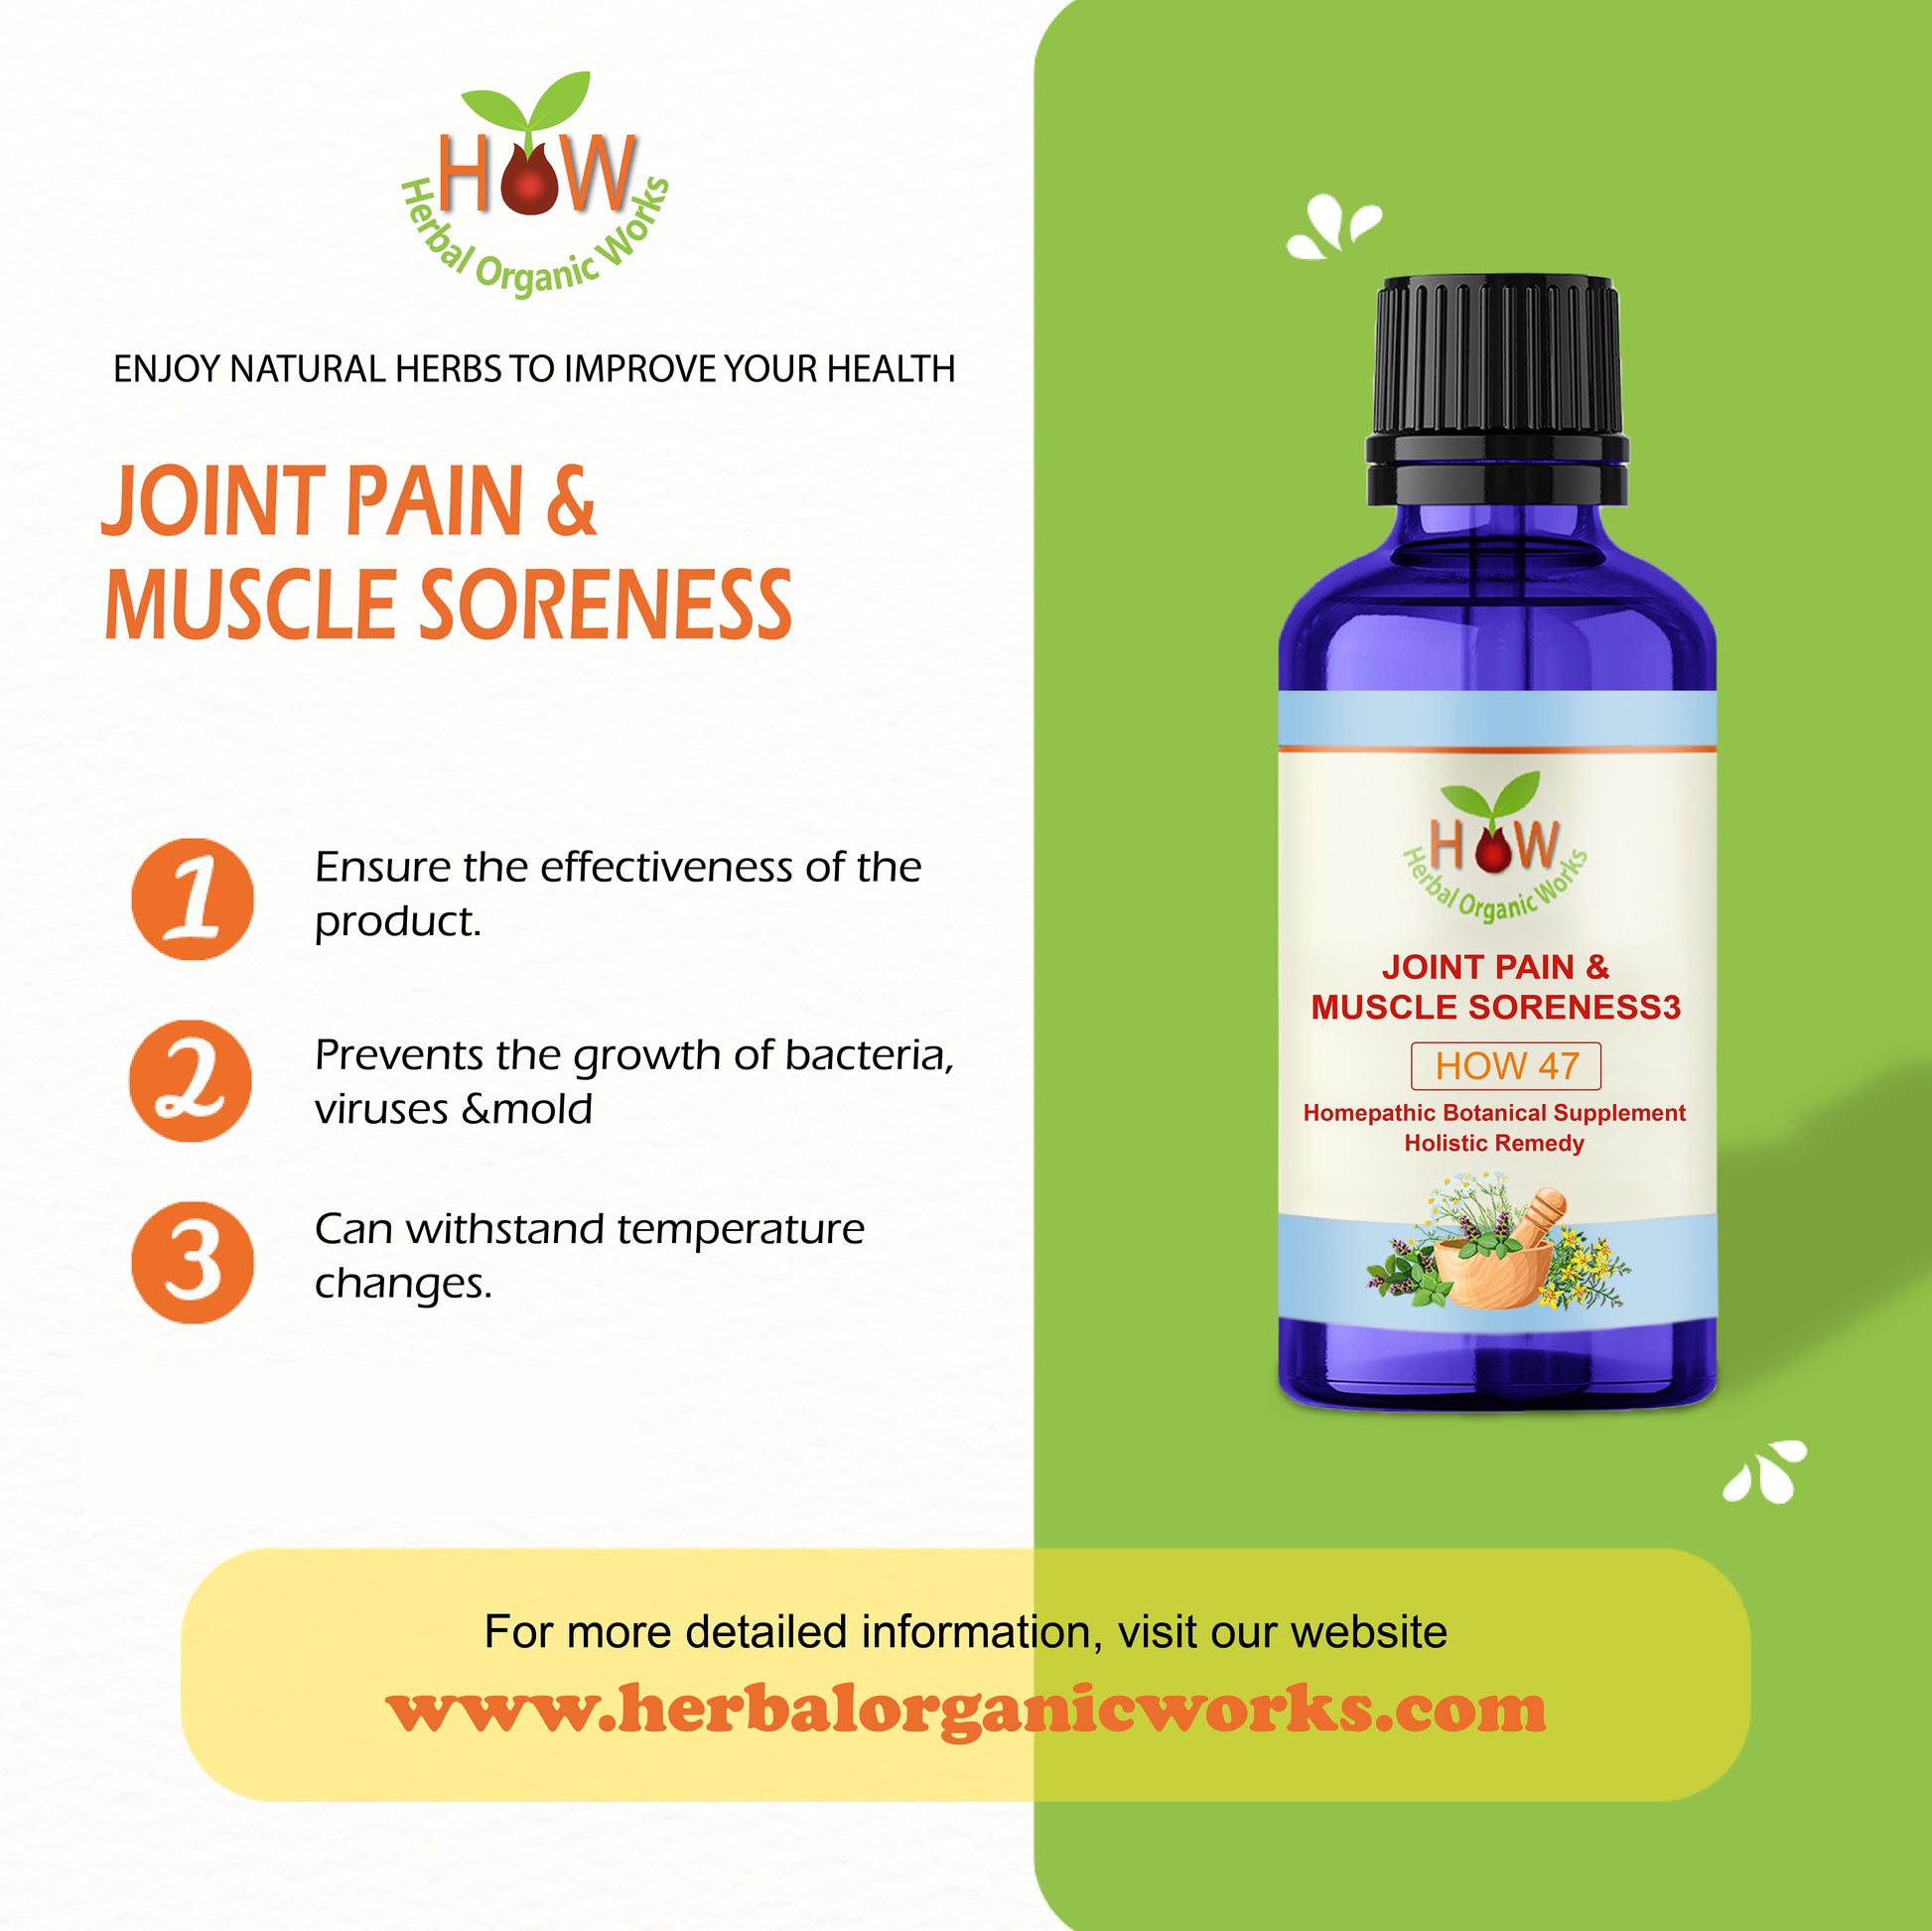 JOINT PAIN AND MUSCLE SORENESS REMEDY (HOW47)